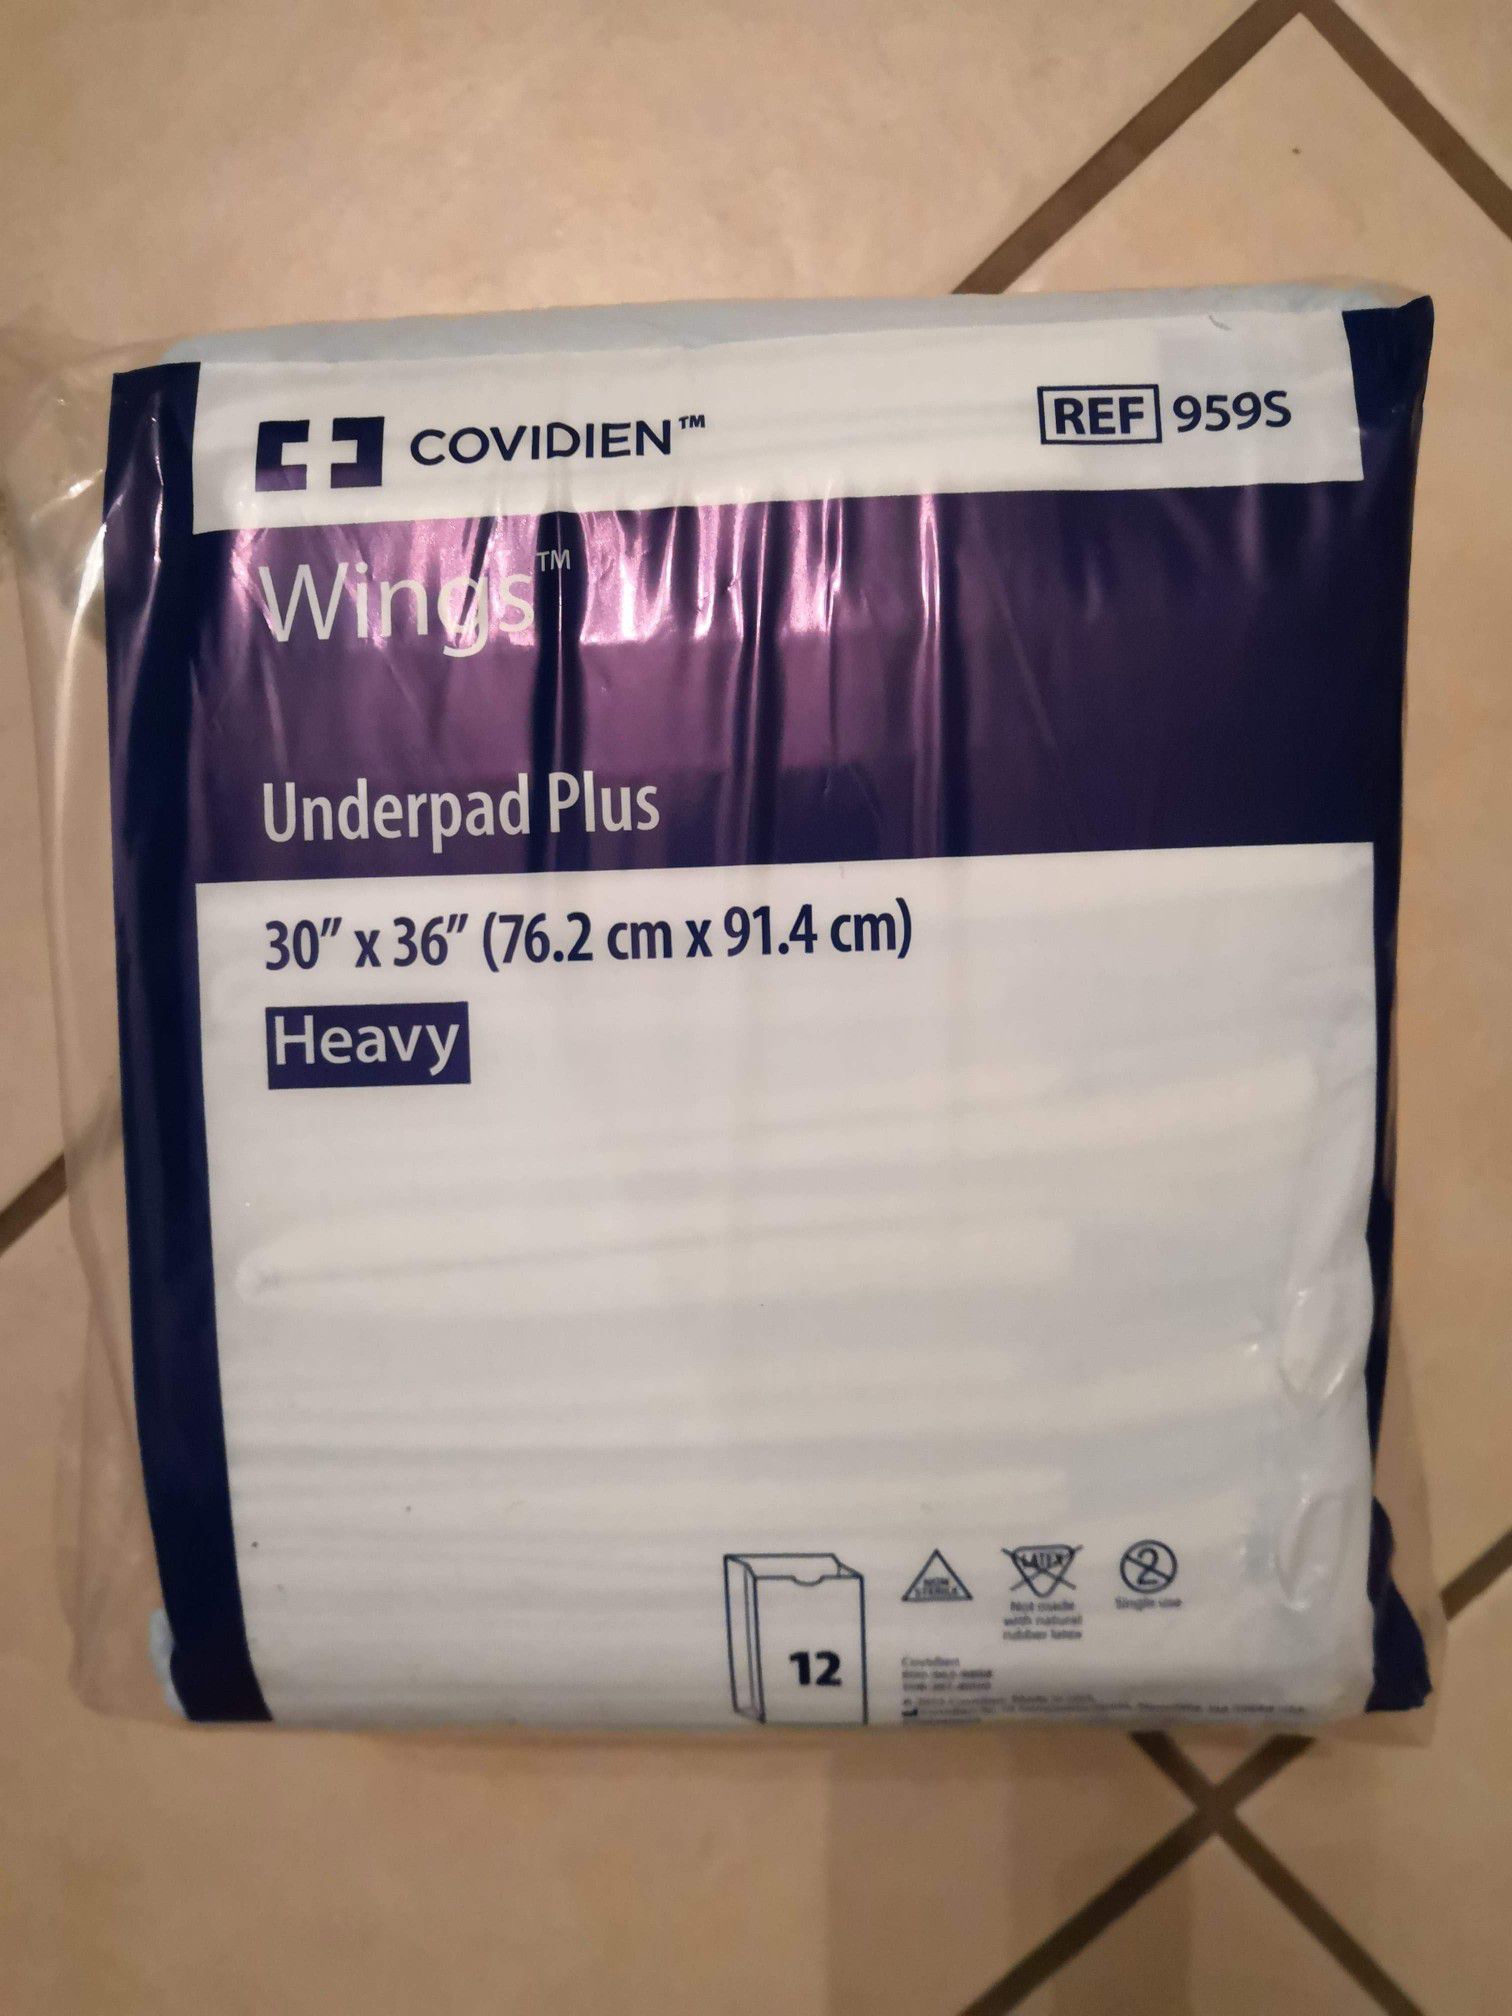 2 cases of 8 bags of 12 -30 x 36 underpads